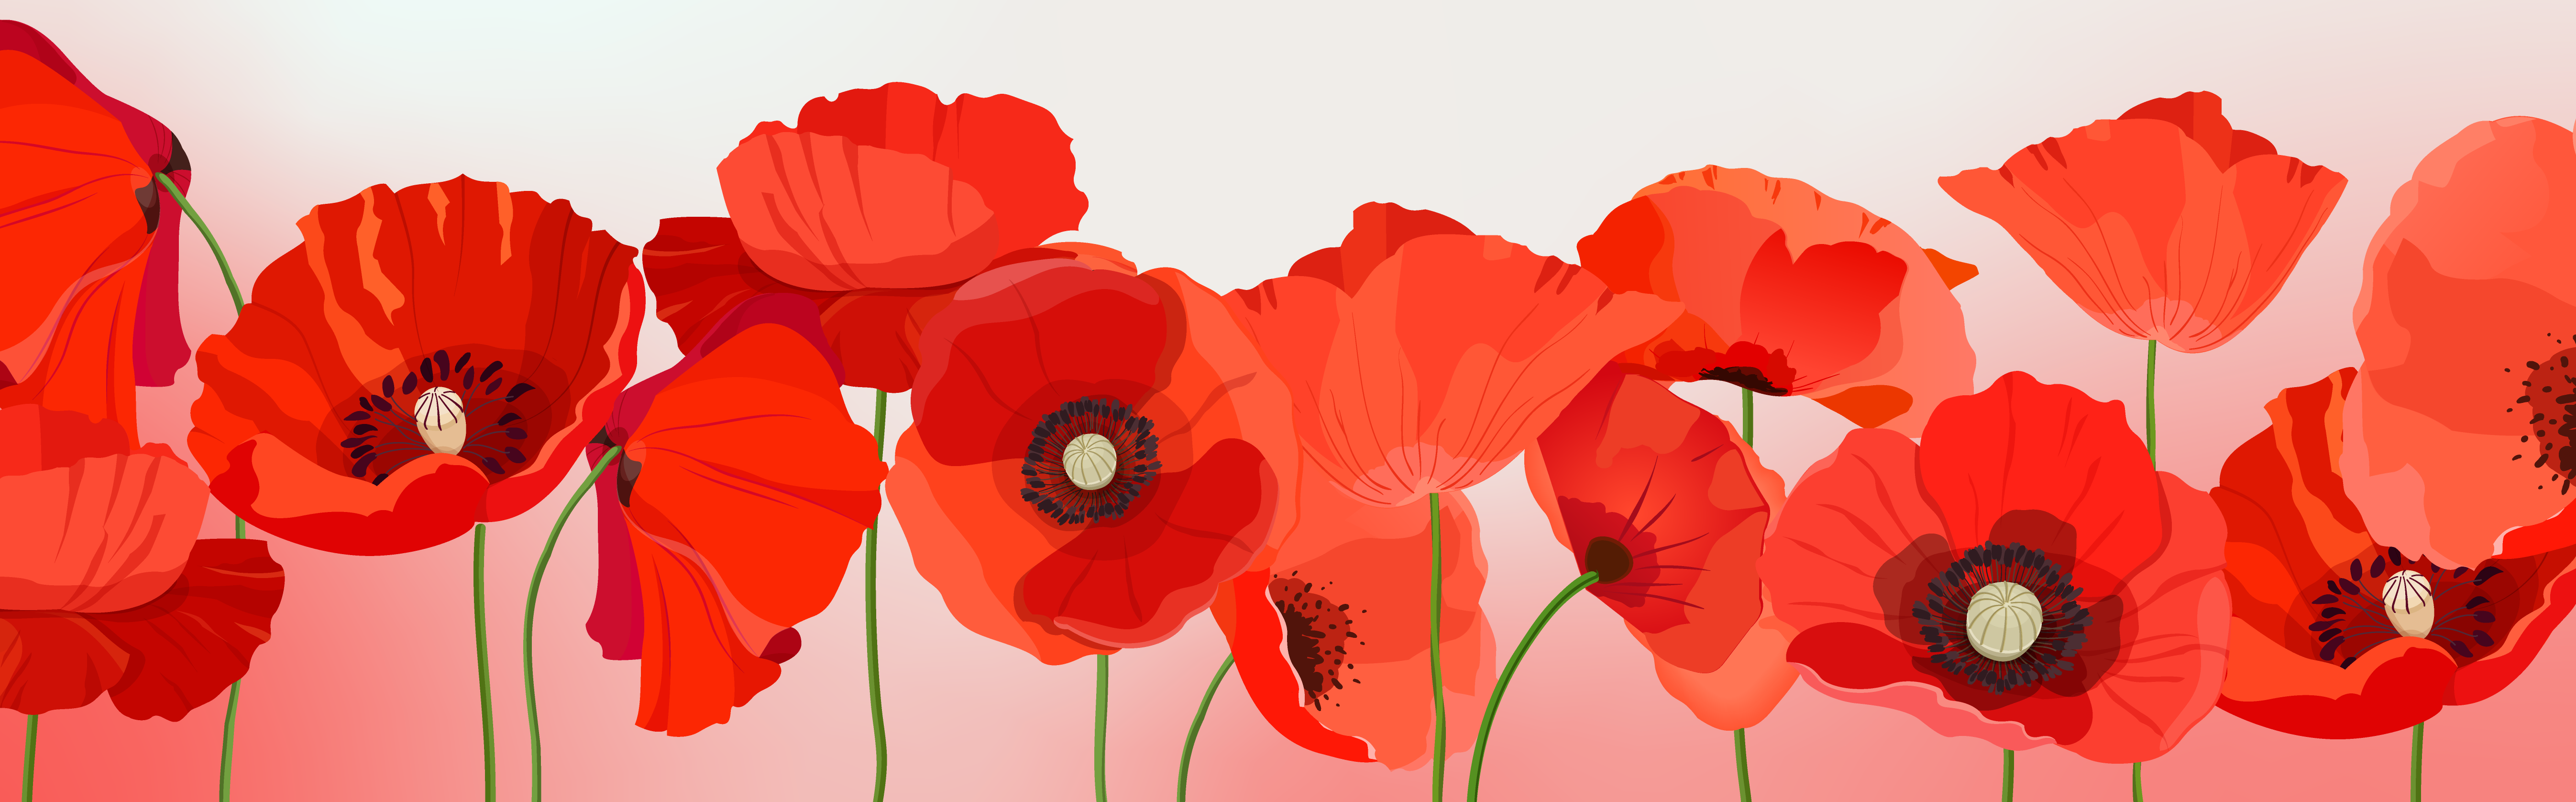 Poppy for Remembrance Day in Canada